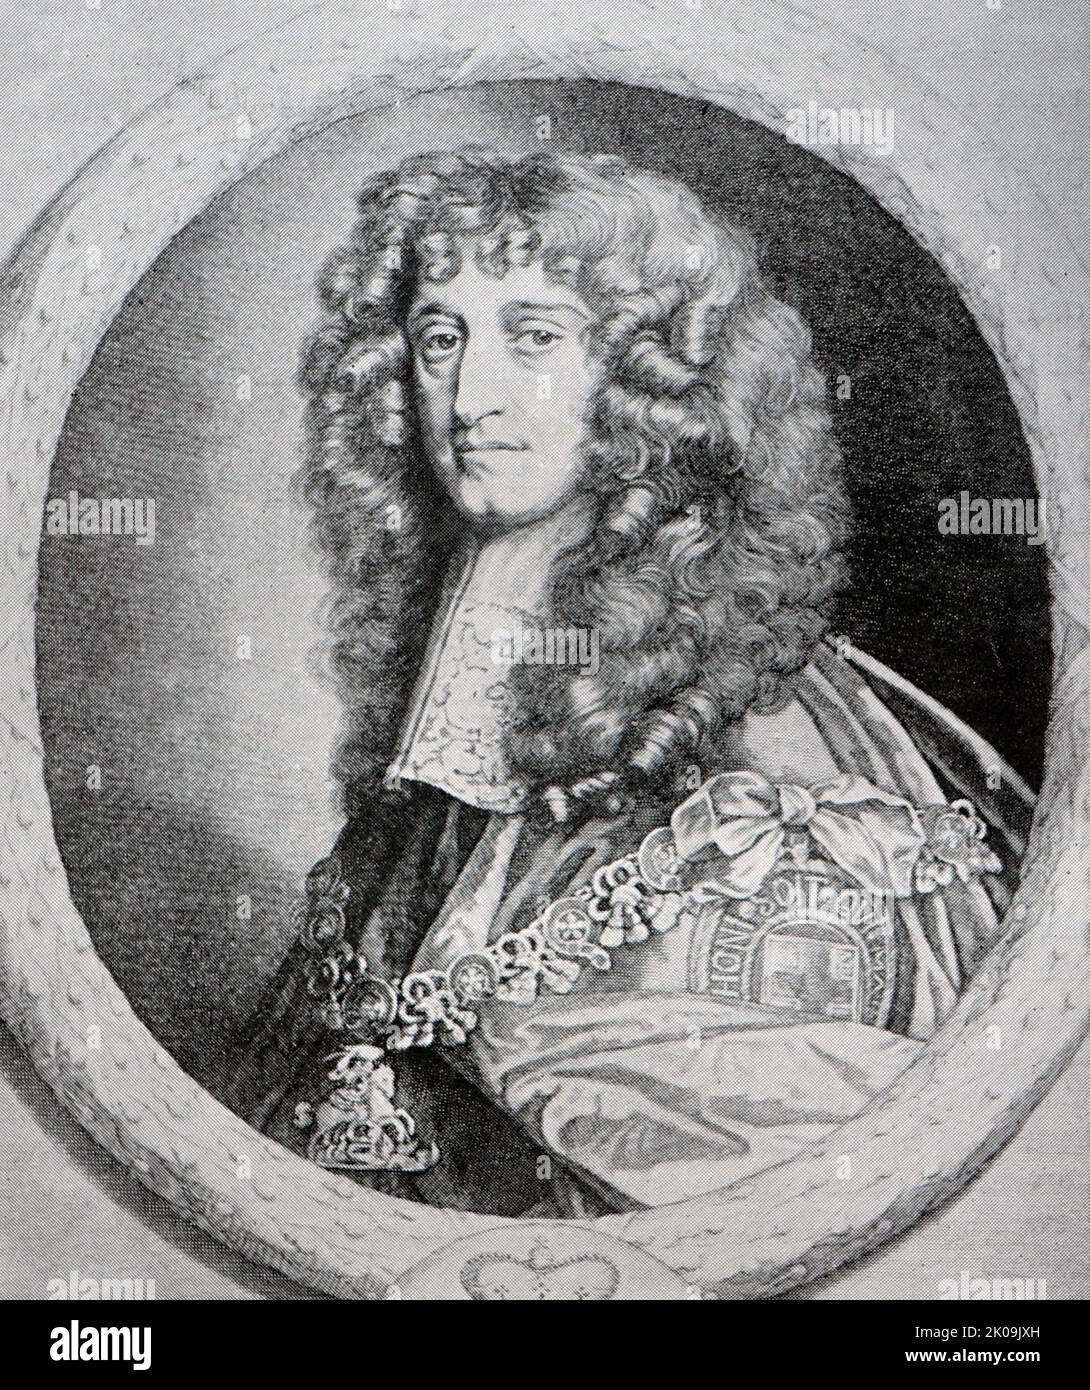 Prince Rupert of the Rhine, Duke of Cumberland, KG, PC, FRS (17 December 1619 - 29 November 1682) was a German-English army officer, admiral, scientist and colonial governor. He first came to prominence as a Royalist cavalry commander during the English Civil War. Stock Photo